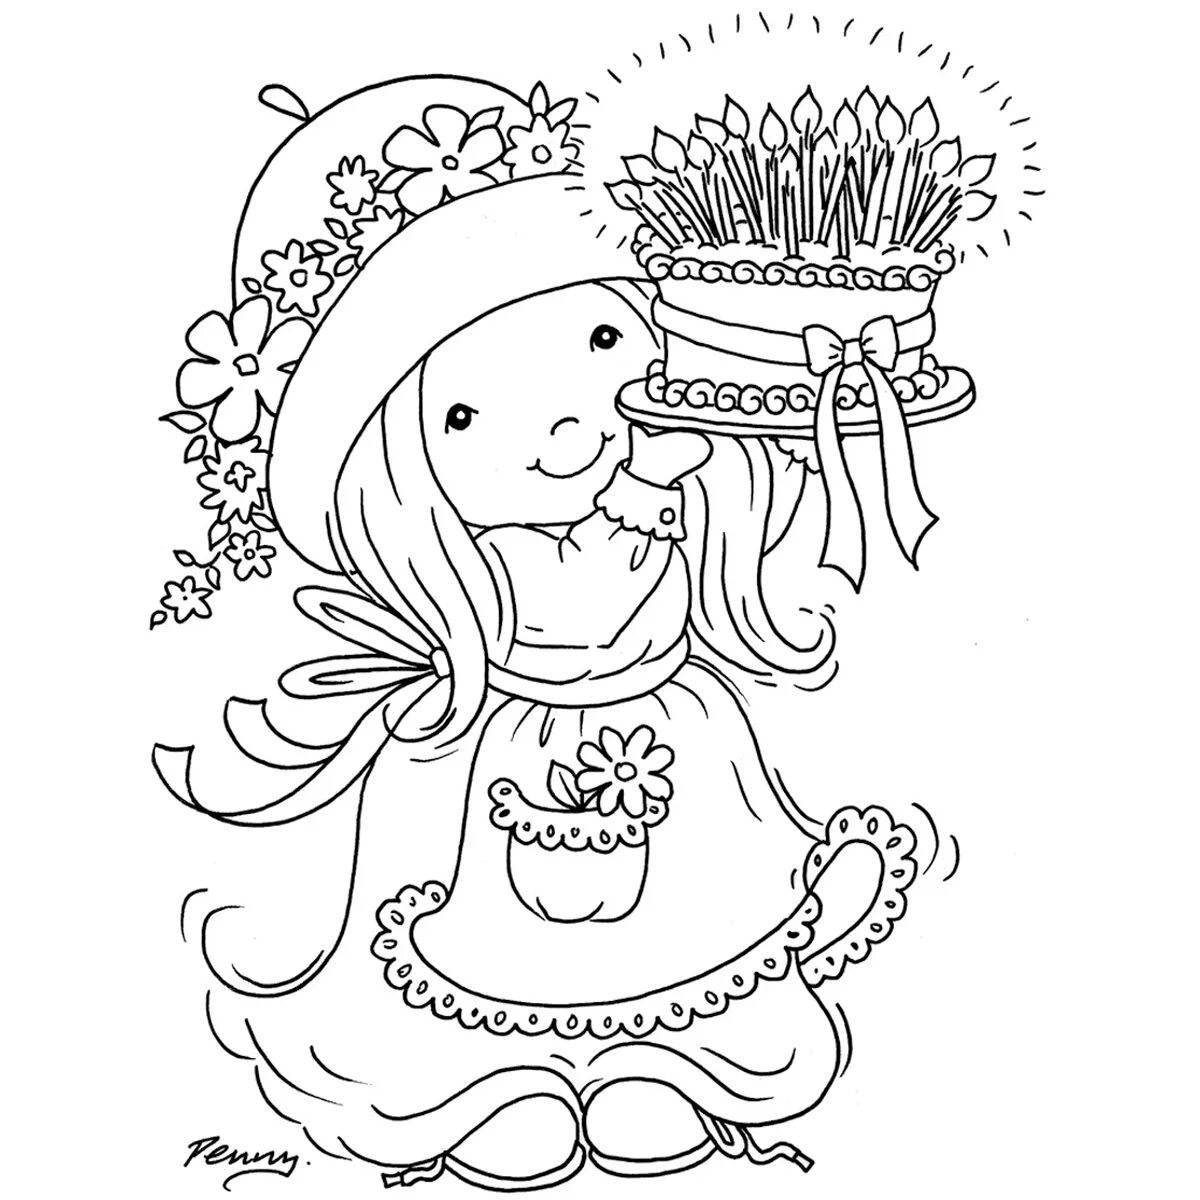 Adorable pinterest coloring book for kids